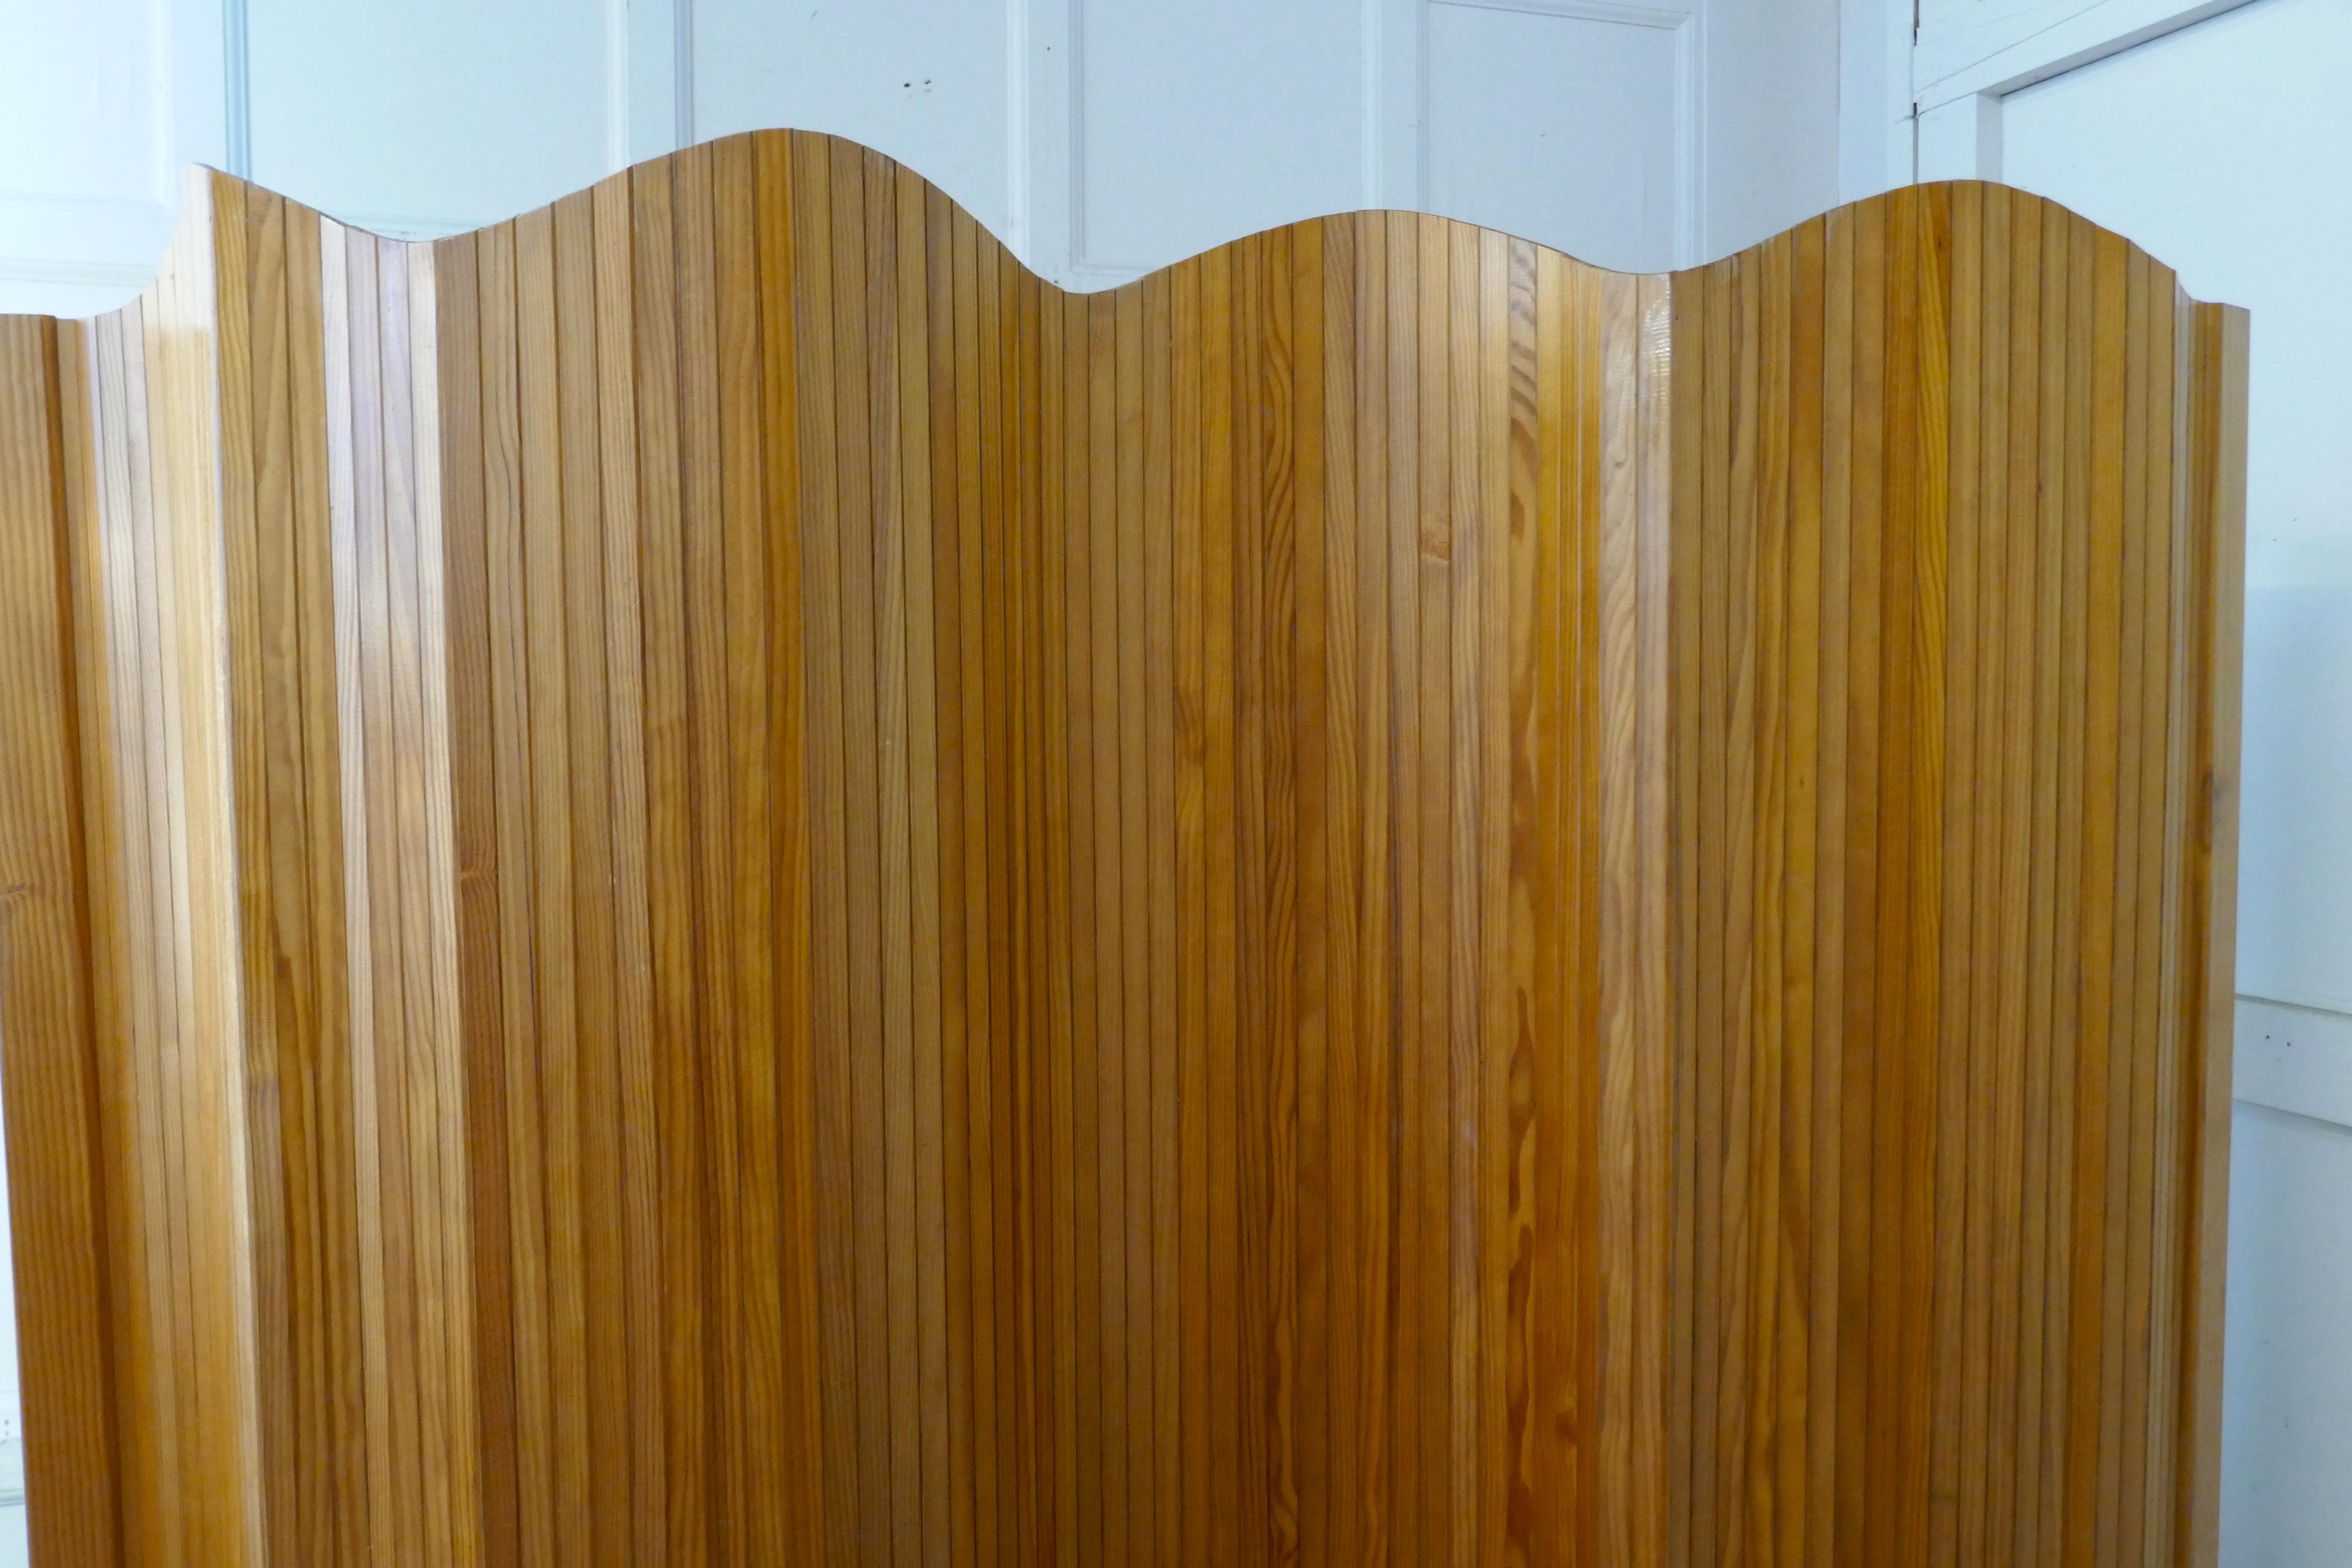 French Art Deco tambour room divider screen

This is a tall Art Deco Wooden Screen, it is made from golden beech, the top edge has waved shape
As it is tambour screen (made from wooden slats) it can be rolled up when not in use
The screen looks